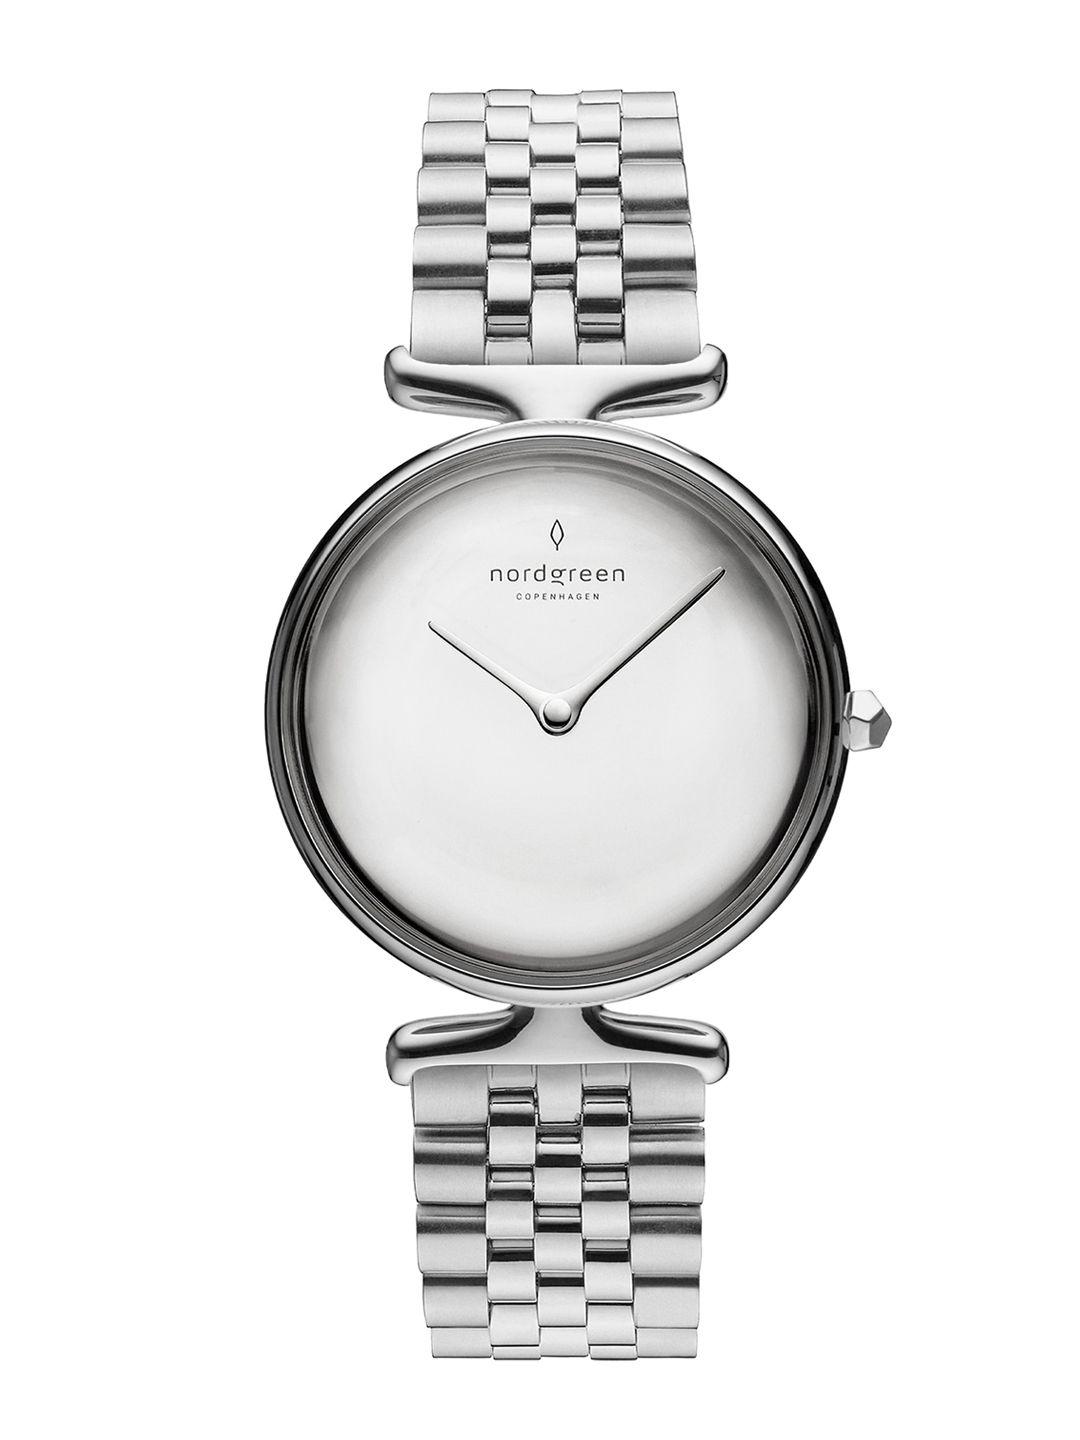 nordgreen-women-stainless-steel-oval-analogue-watch-5714205029283